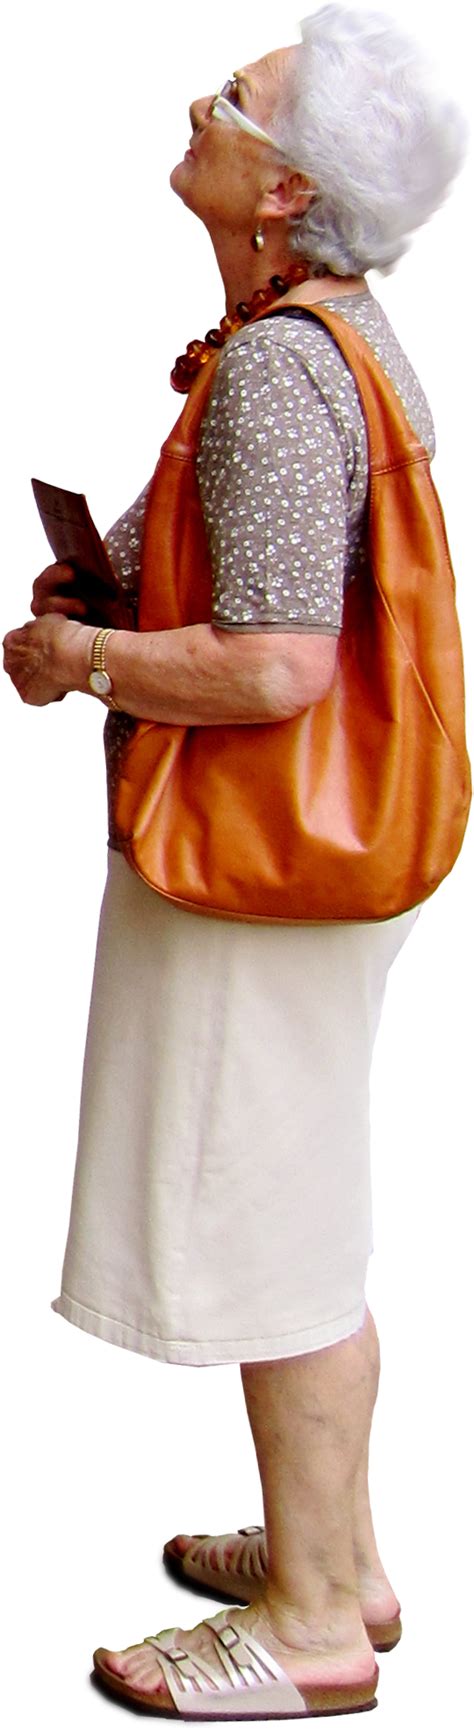 Old Woman Looking Up At Something With A Large Orange Cut Out People